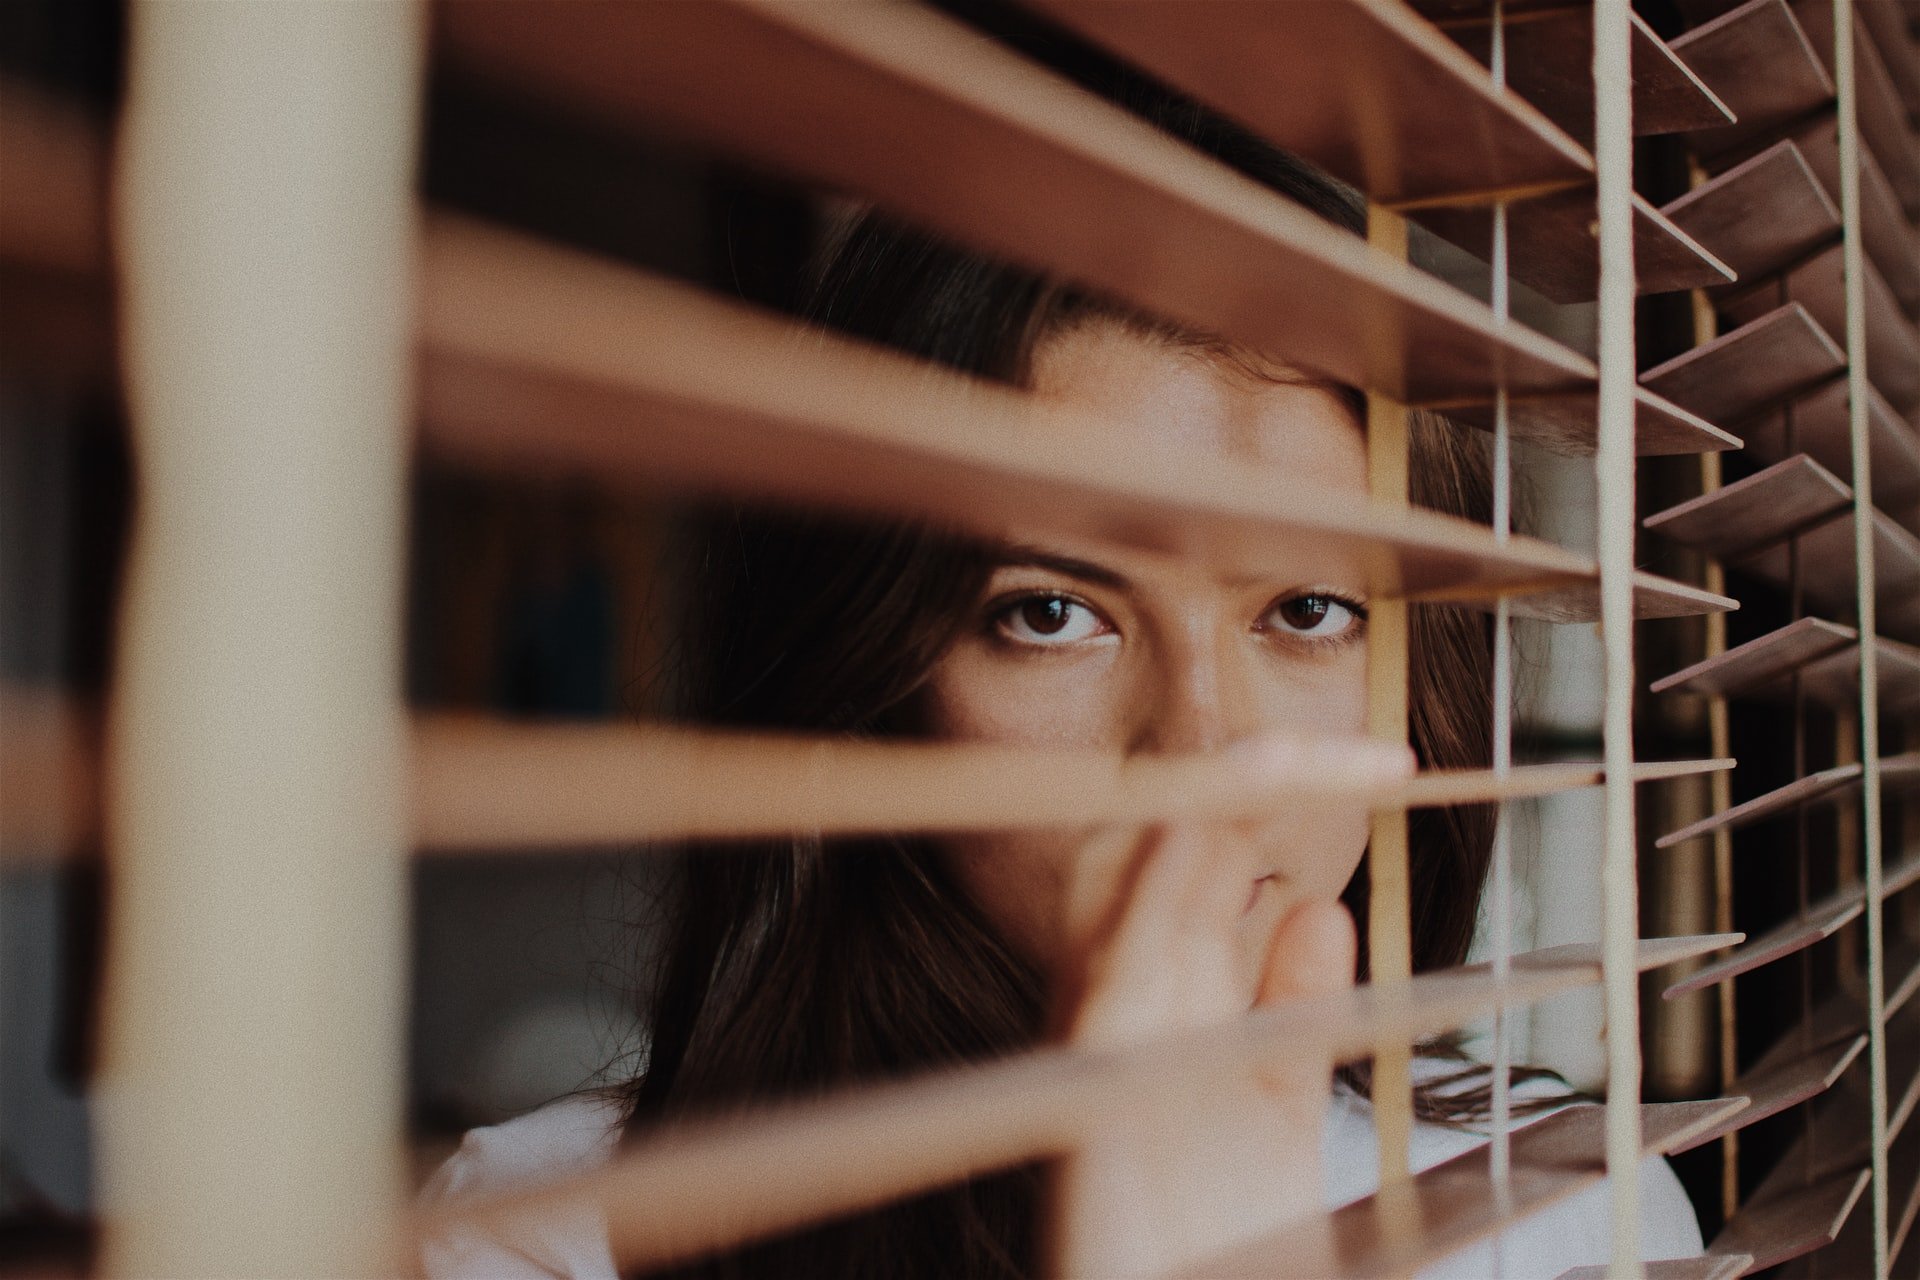 A woman looking through window blinds | Source: Unsplash